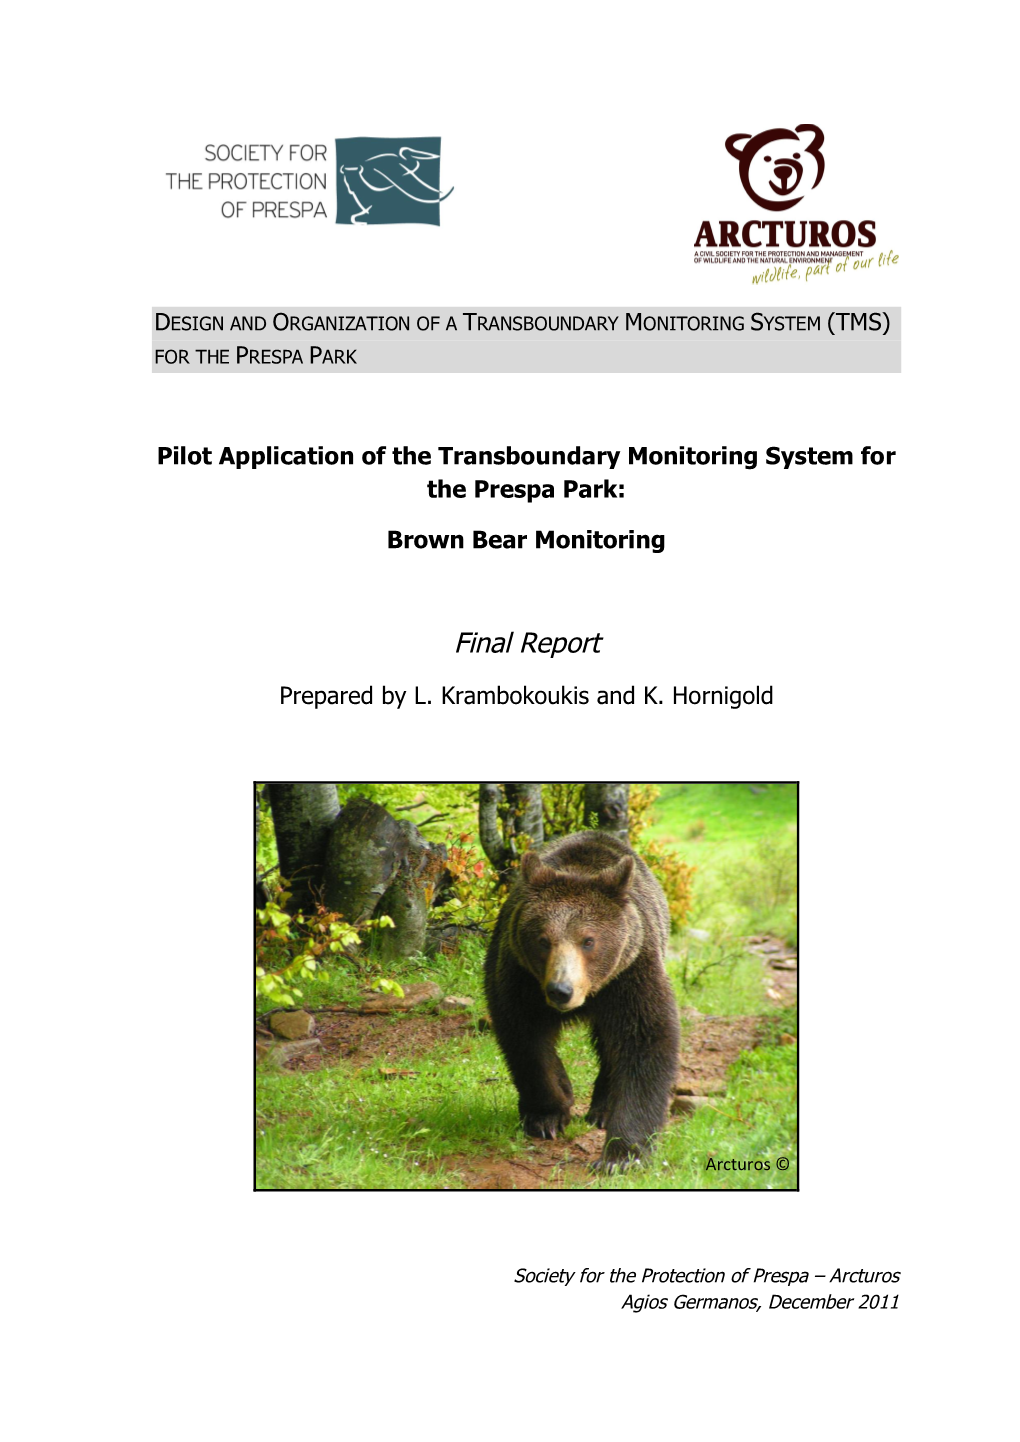 Pilot Application of the Transboundary Monitoring System for the Prespa Park